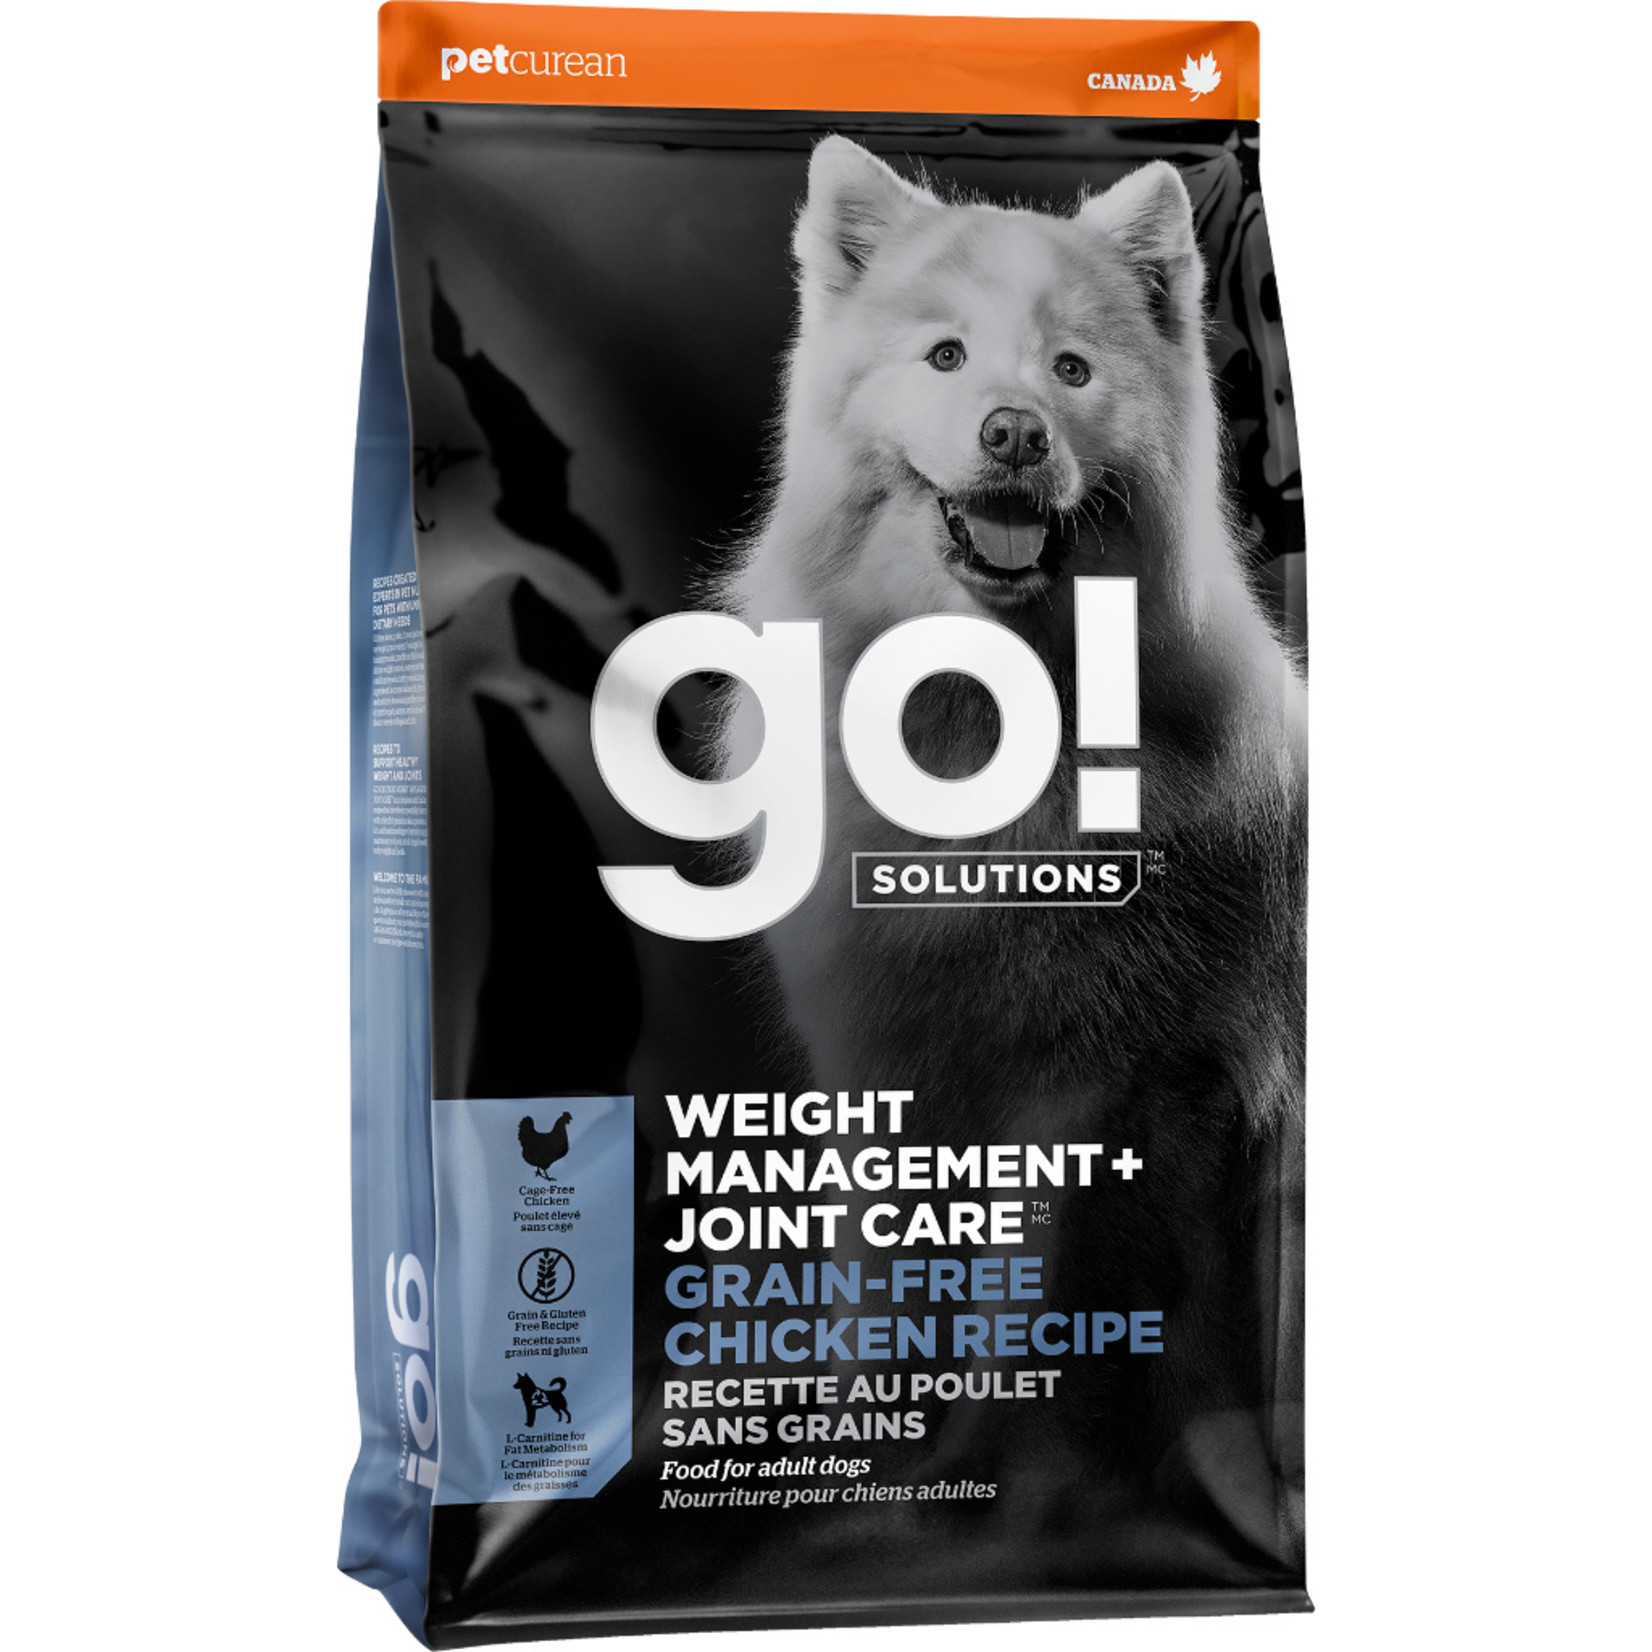 Go! go! dog weight management and joint care grain free chicken recipe